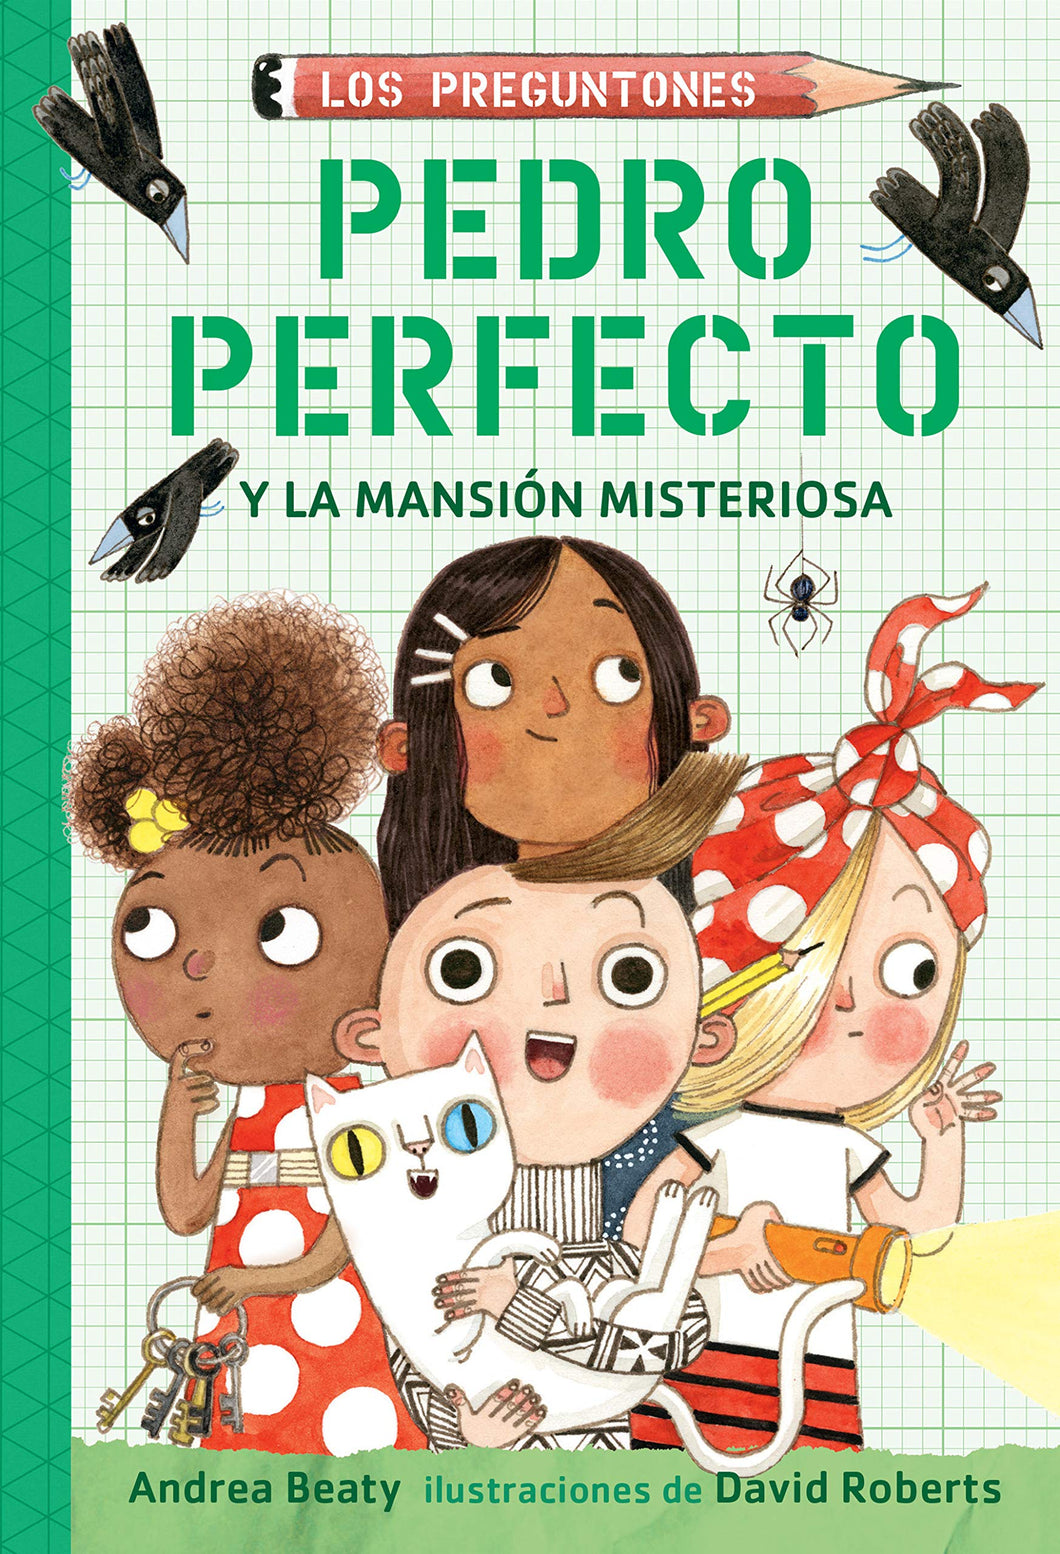 Pedro Perfecto y la Mansión Misteriosa / Iggy Peck and the Mysterious Mansion (Spanish Edition)